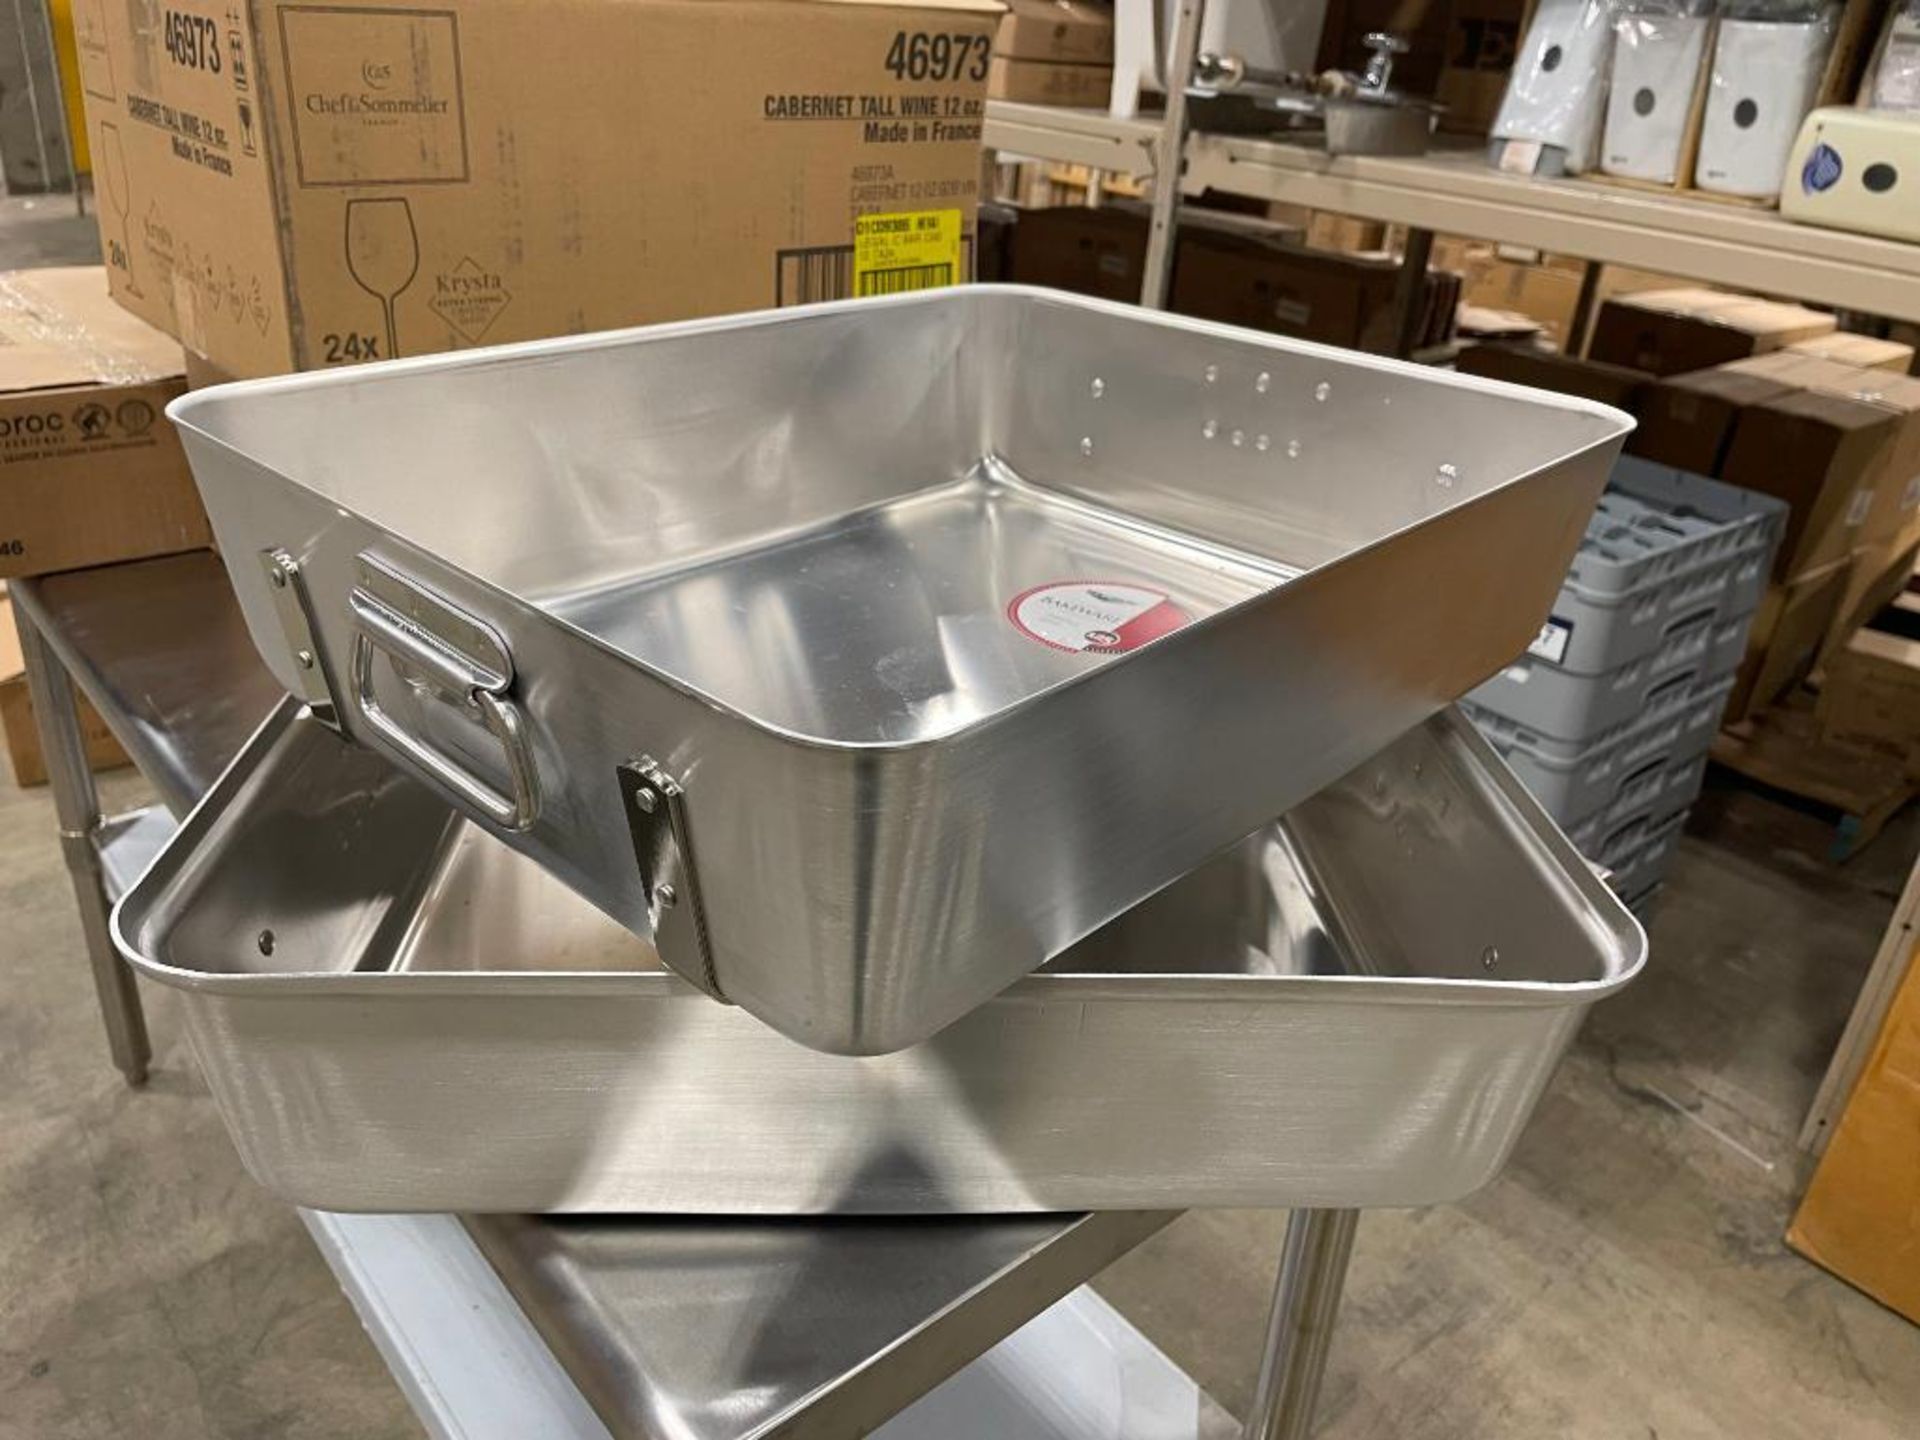 Lot of (2) 22.5"X16.25" Roasting Pans - Image 4 of 6